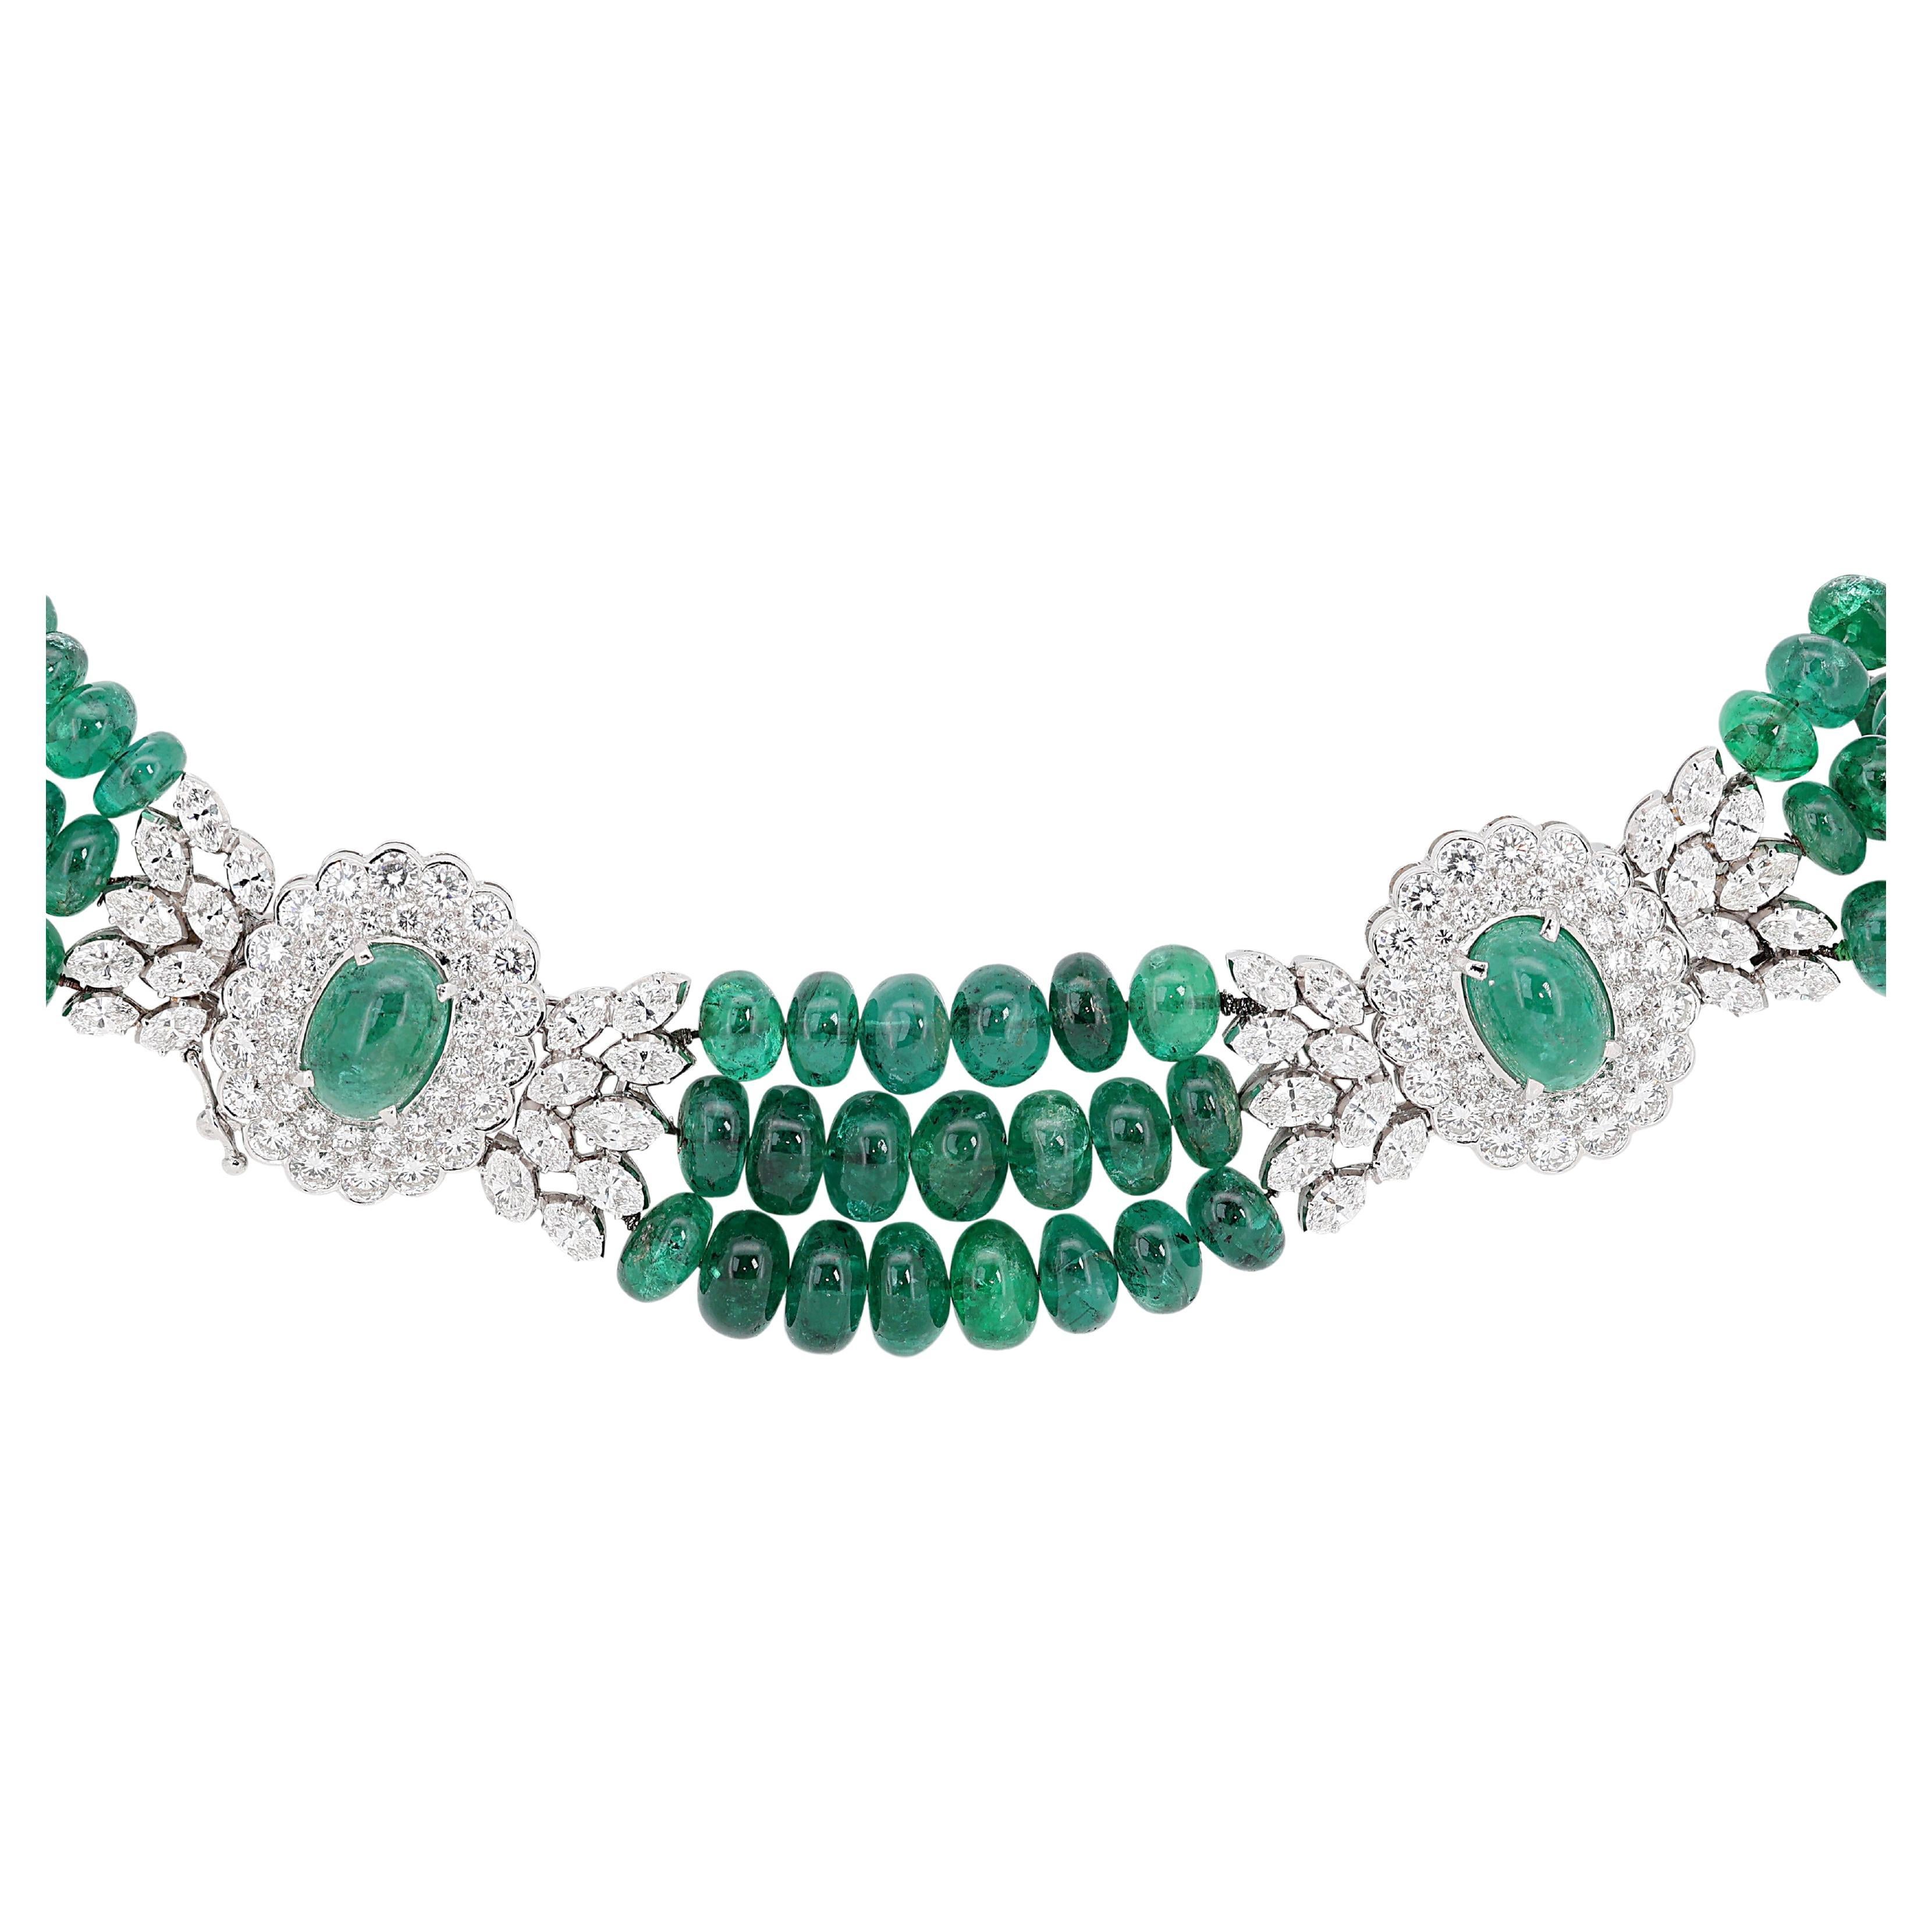 Enchanting 146.85ct Emerald Collar Necklace with Diamonds in 18K White Gold  For Sale